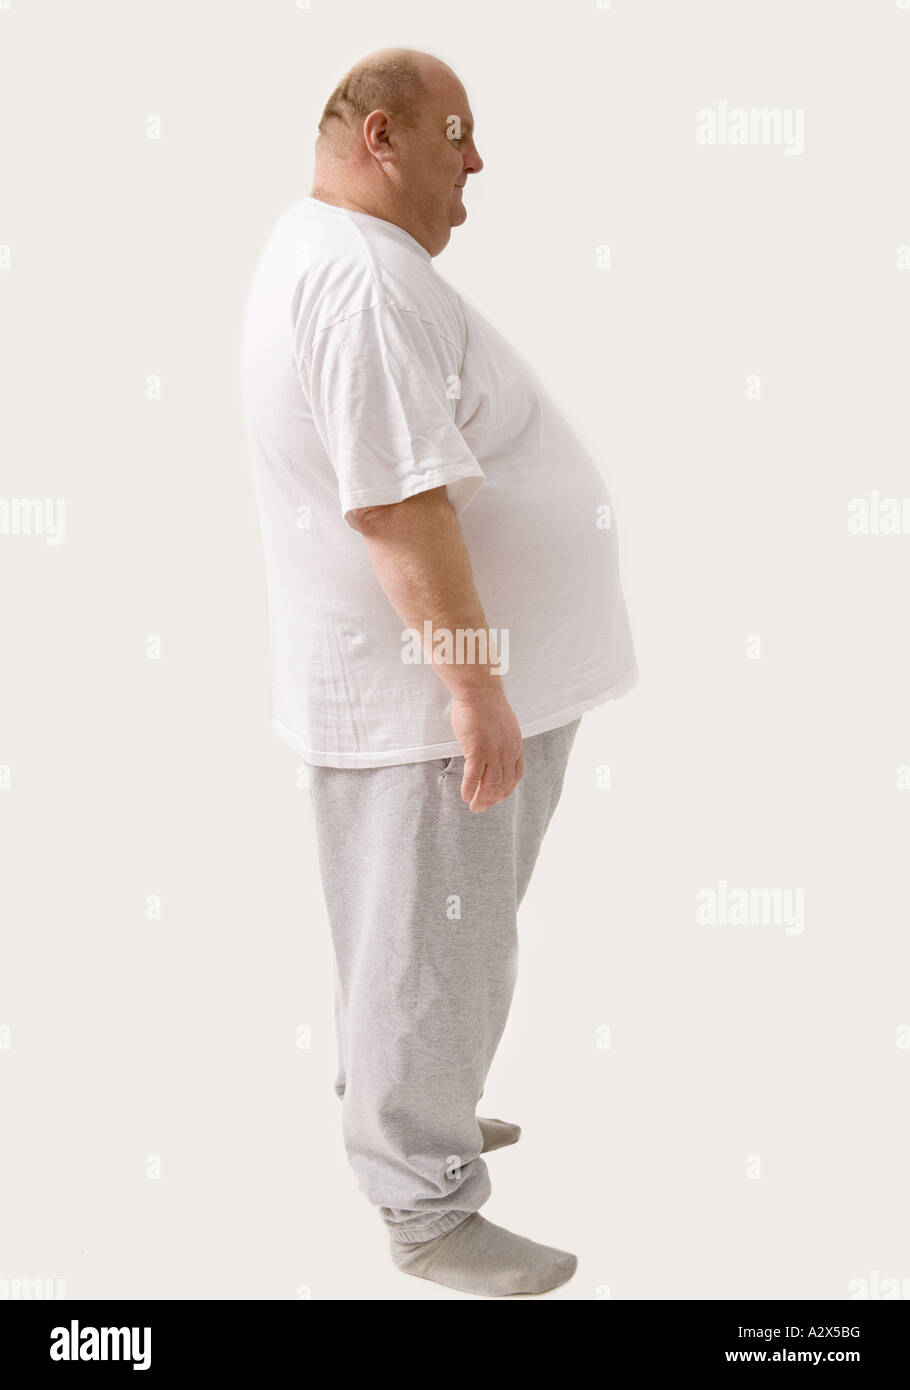 Big man standing in a lateral position. Stock Photo